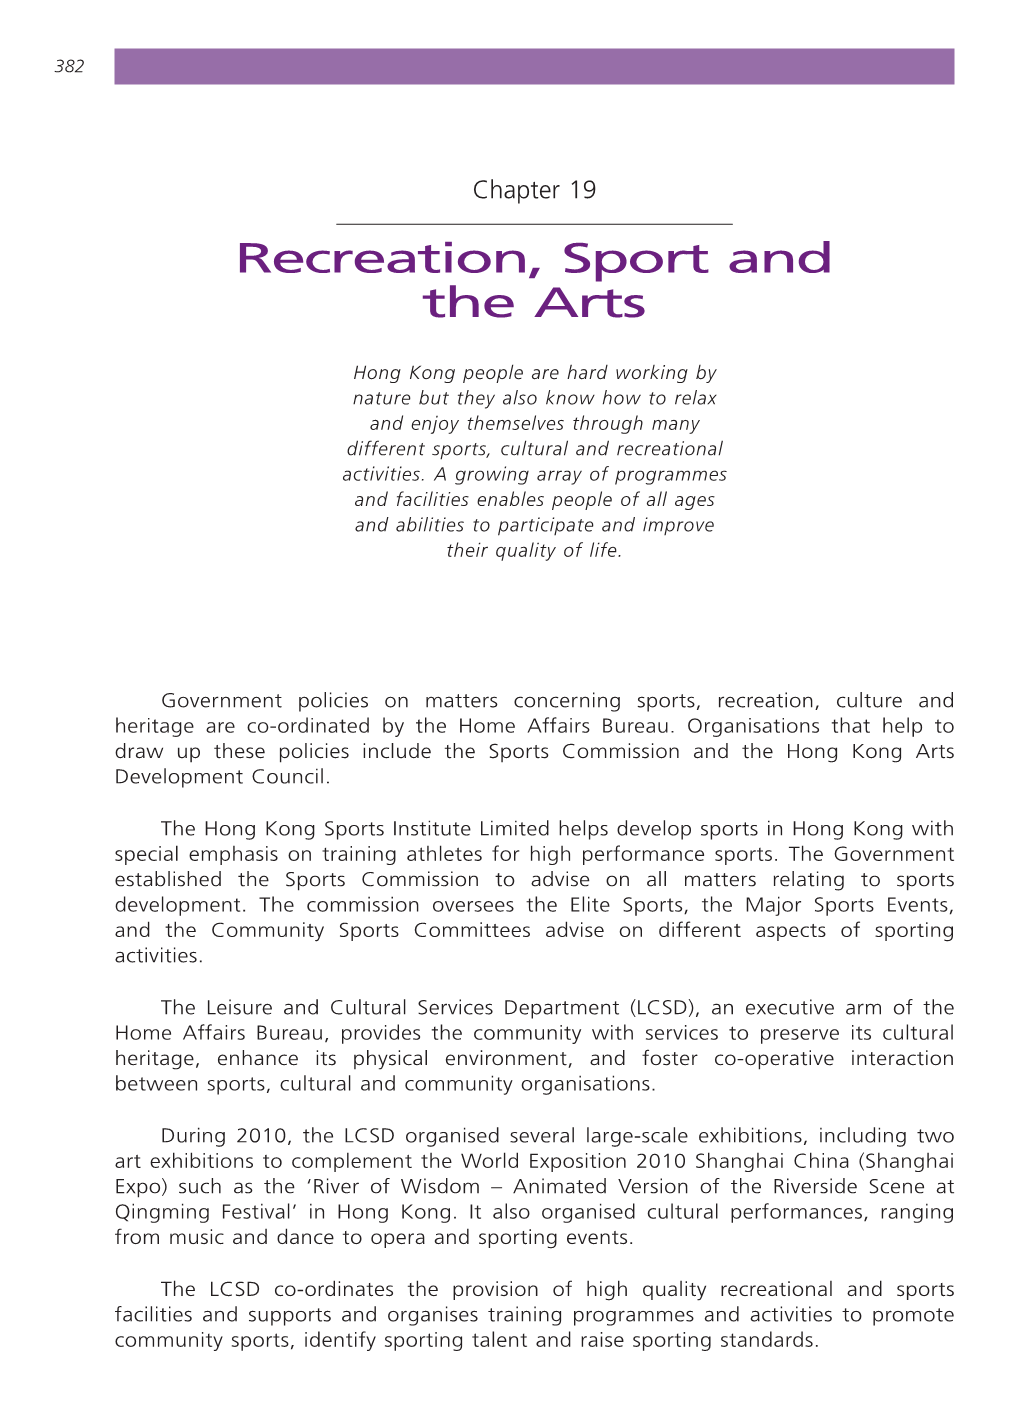 Recreation, Sport and the Arts